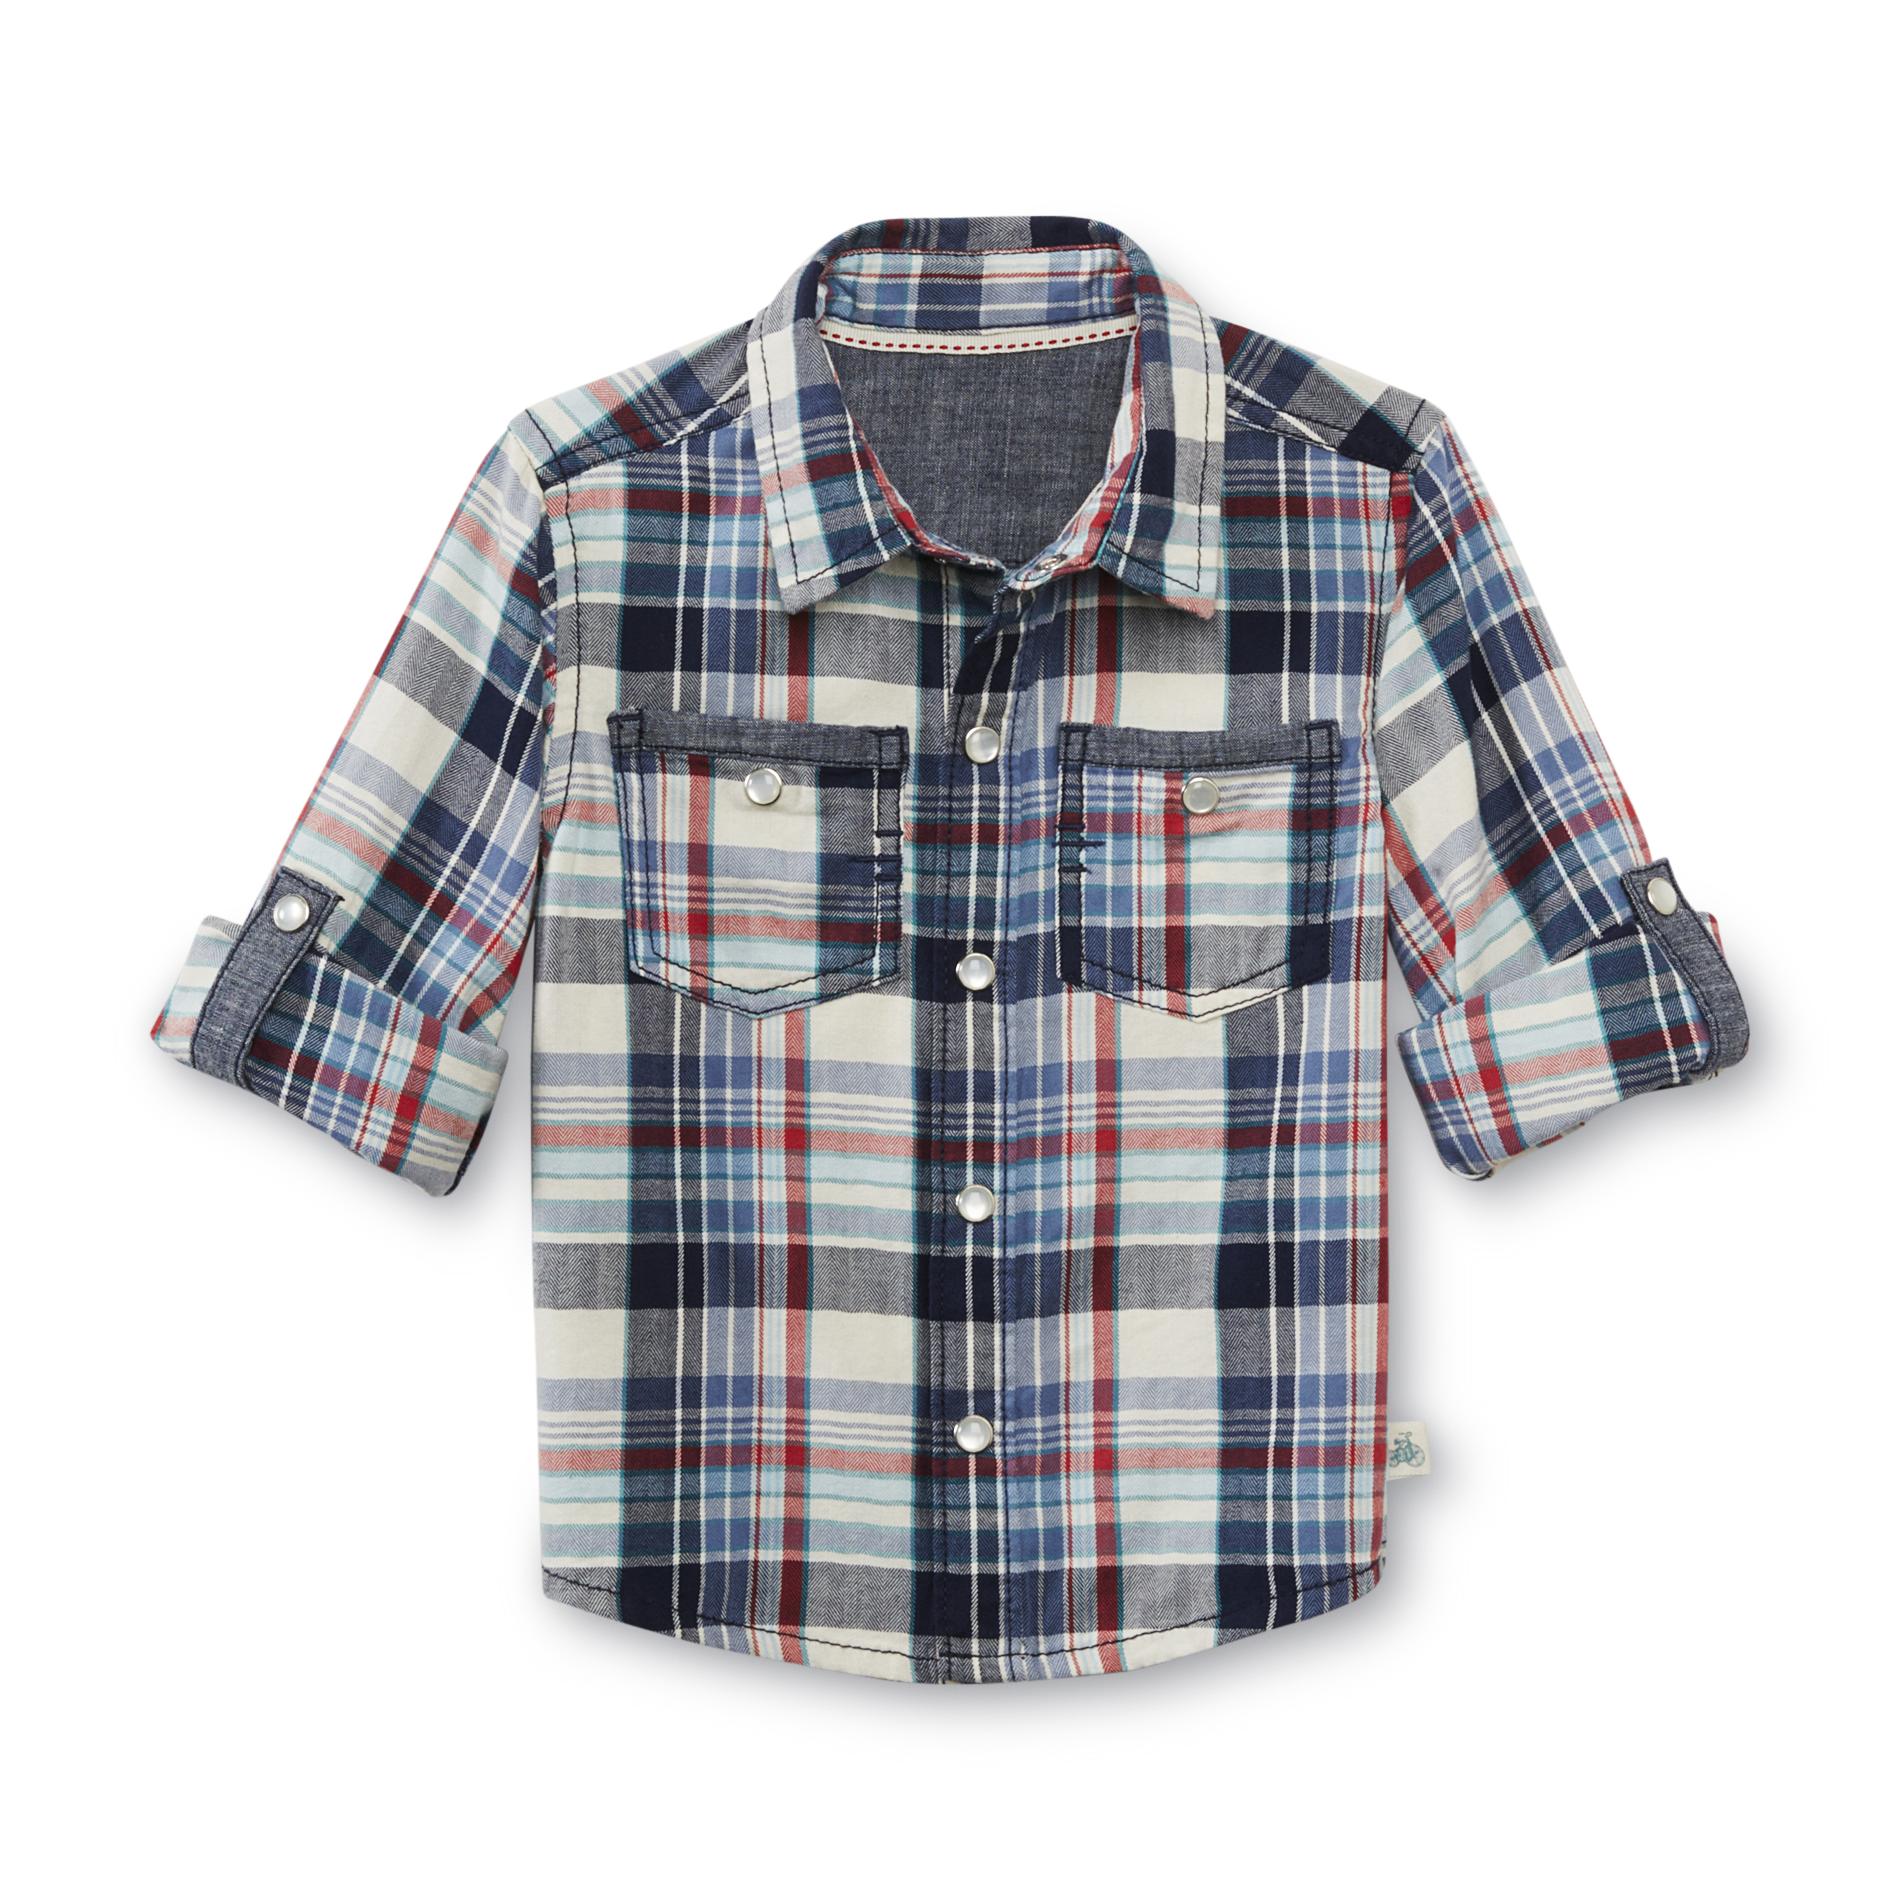 Route 66 Baby Infant & Toddler Boy's Flannel Shirt